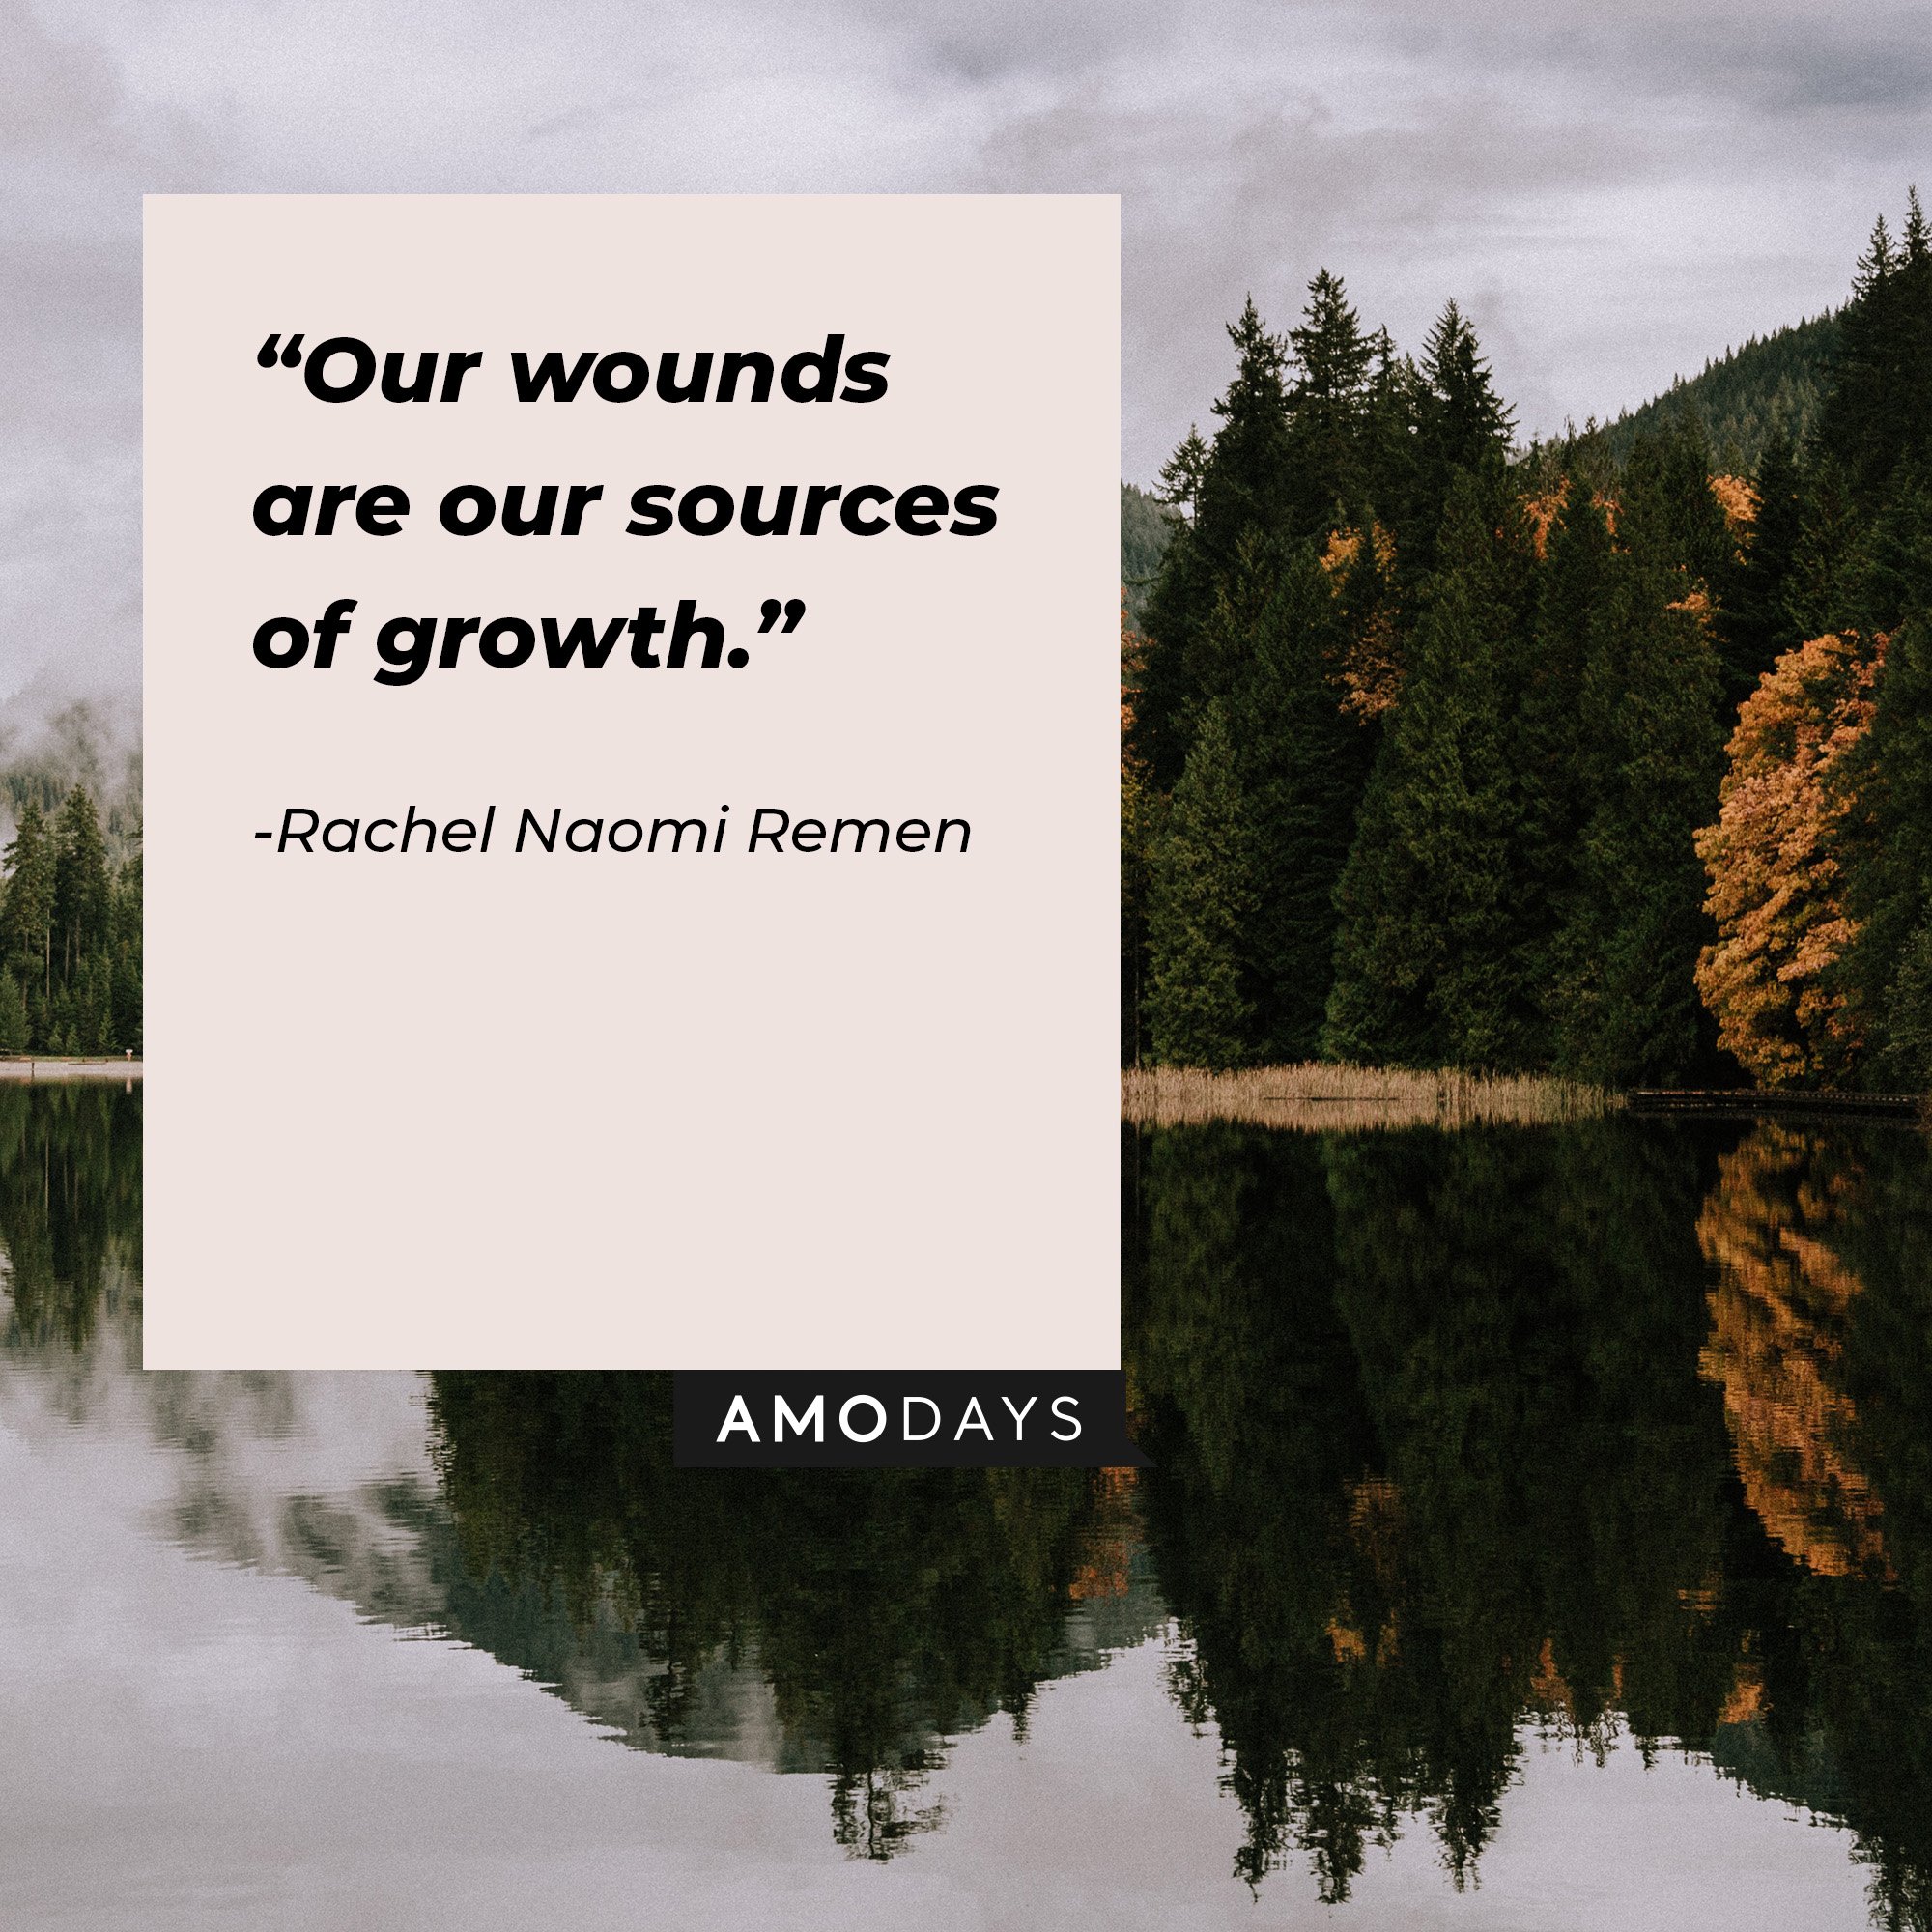 Rachel Naomi Remen’s quote: “Our wounds are our sources of growth.” | Image: AmoDays  